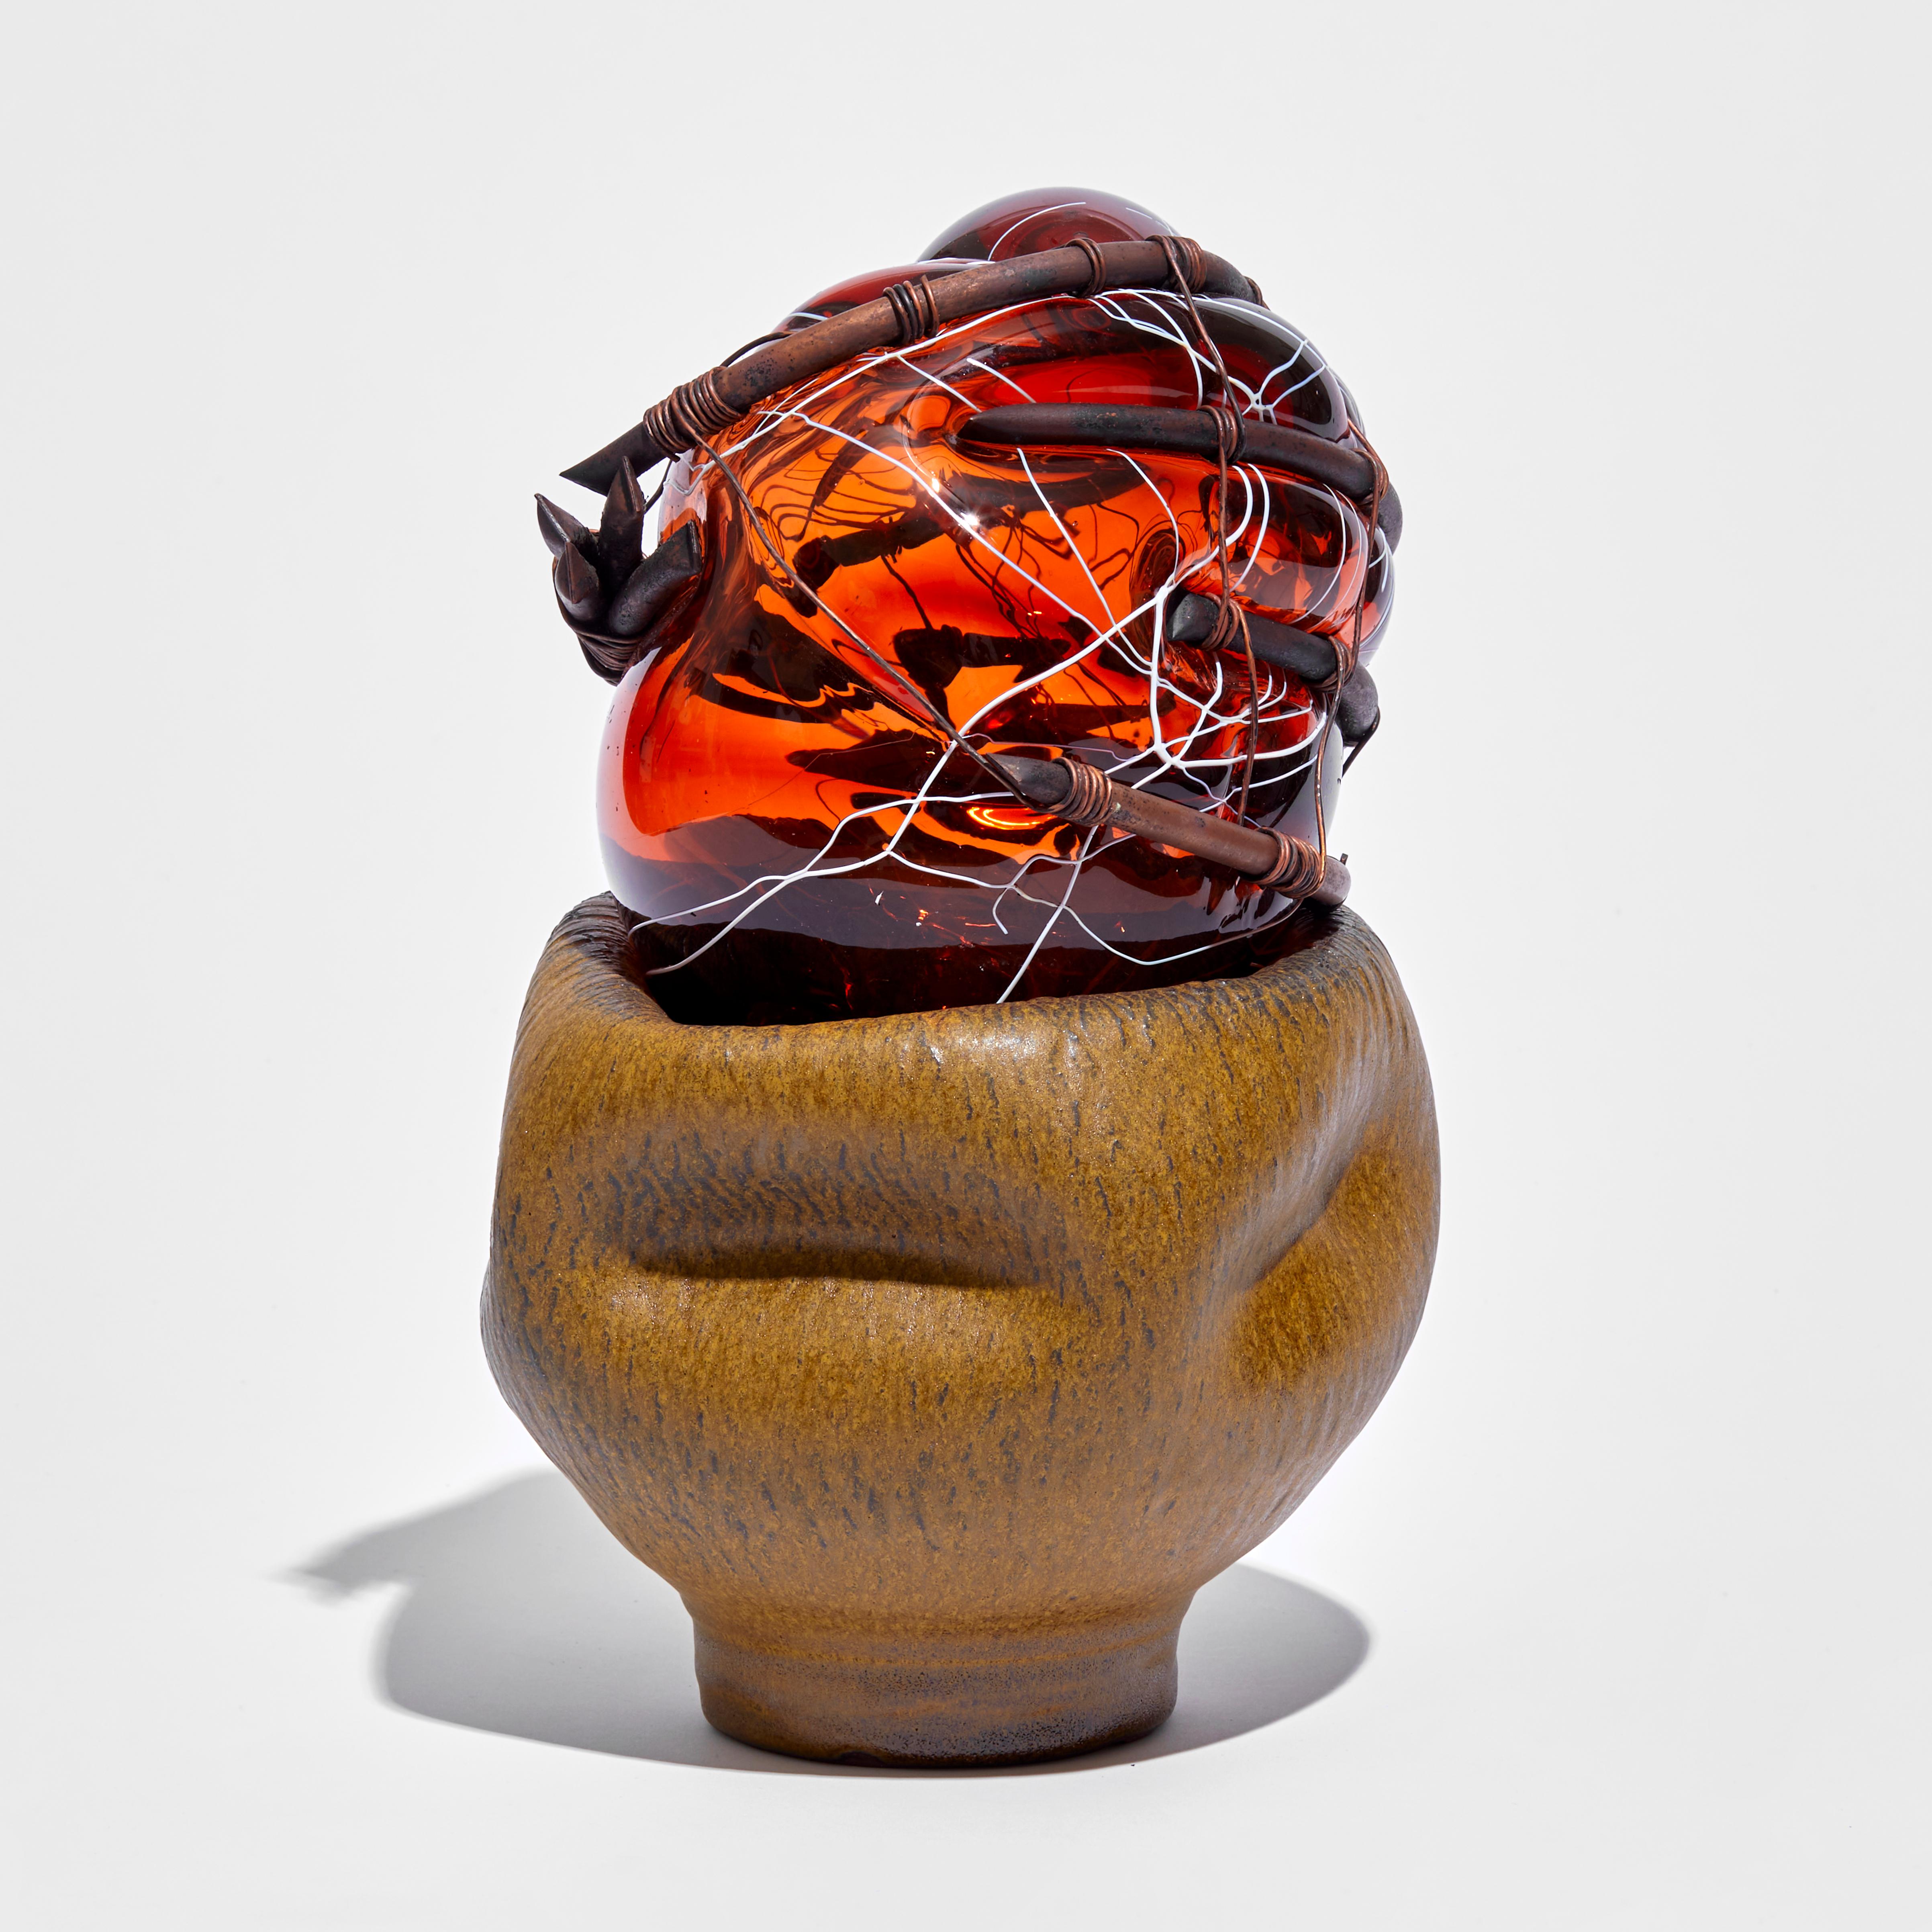 British Strange Fruit-The Congregation IV, Glass & Terracotta Sculpture by Chris Day